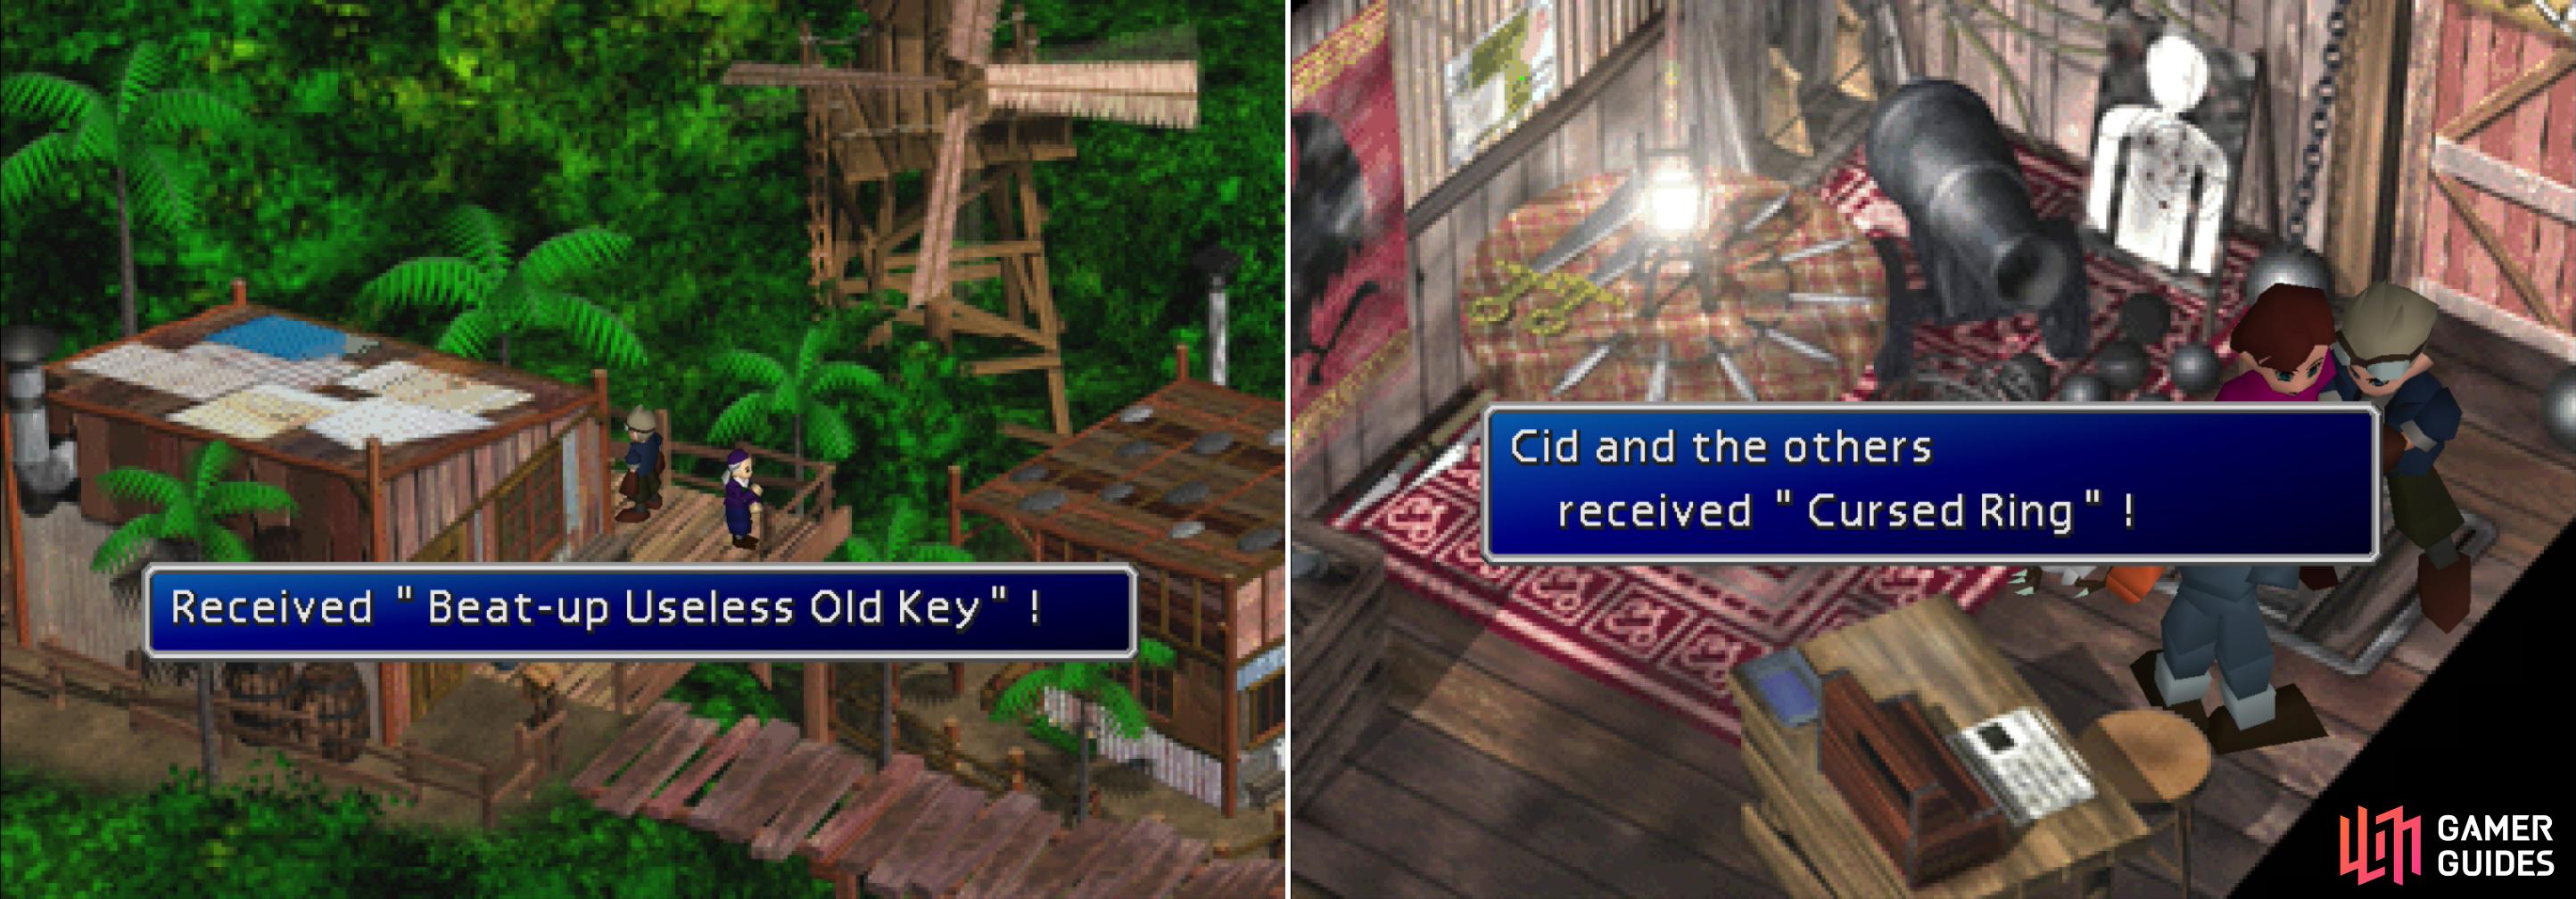 Find the Beat-up Useless Old Key near the accessory shop (left) then try to open the locked door in the weapon shop to get the Cursed Ring (right).